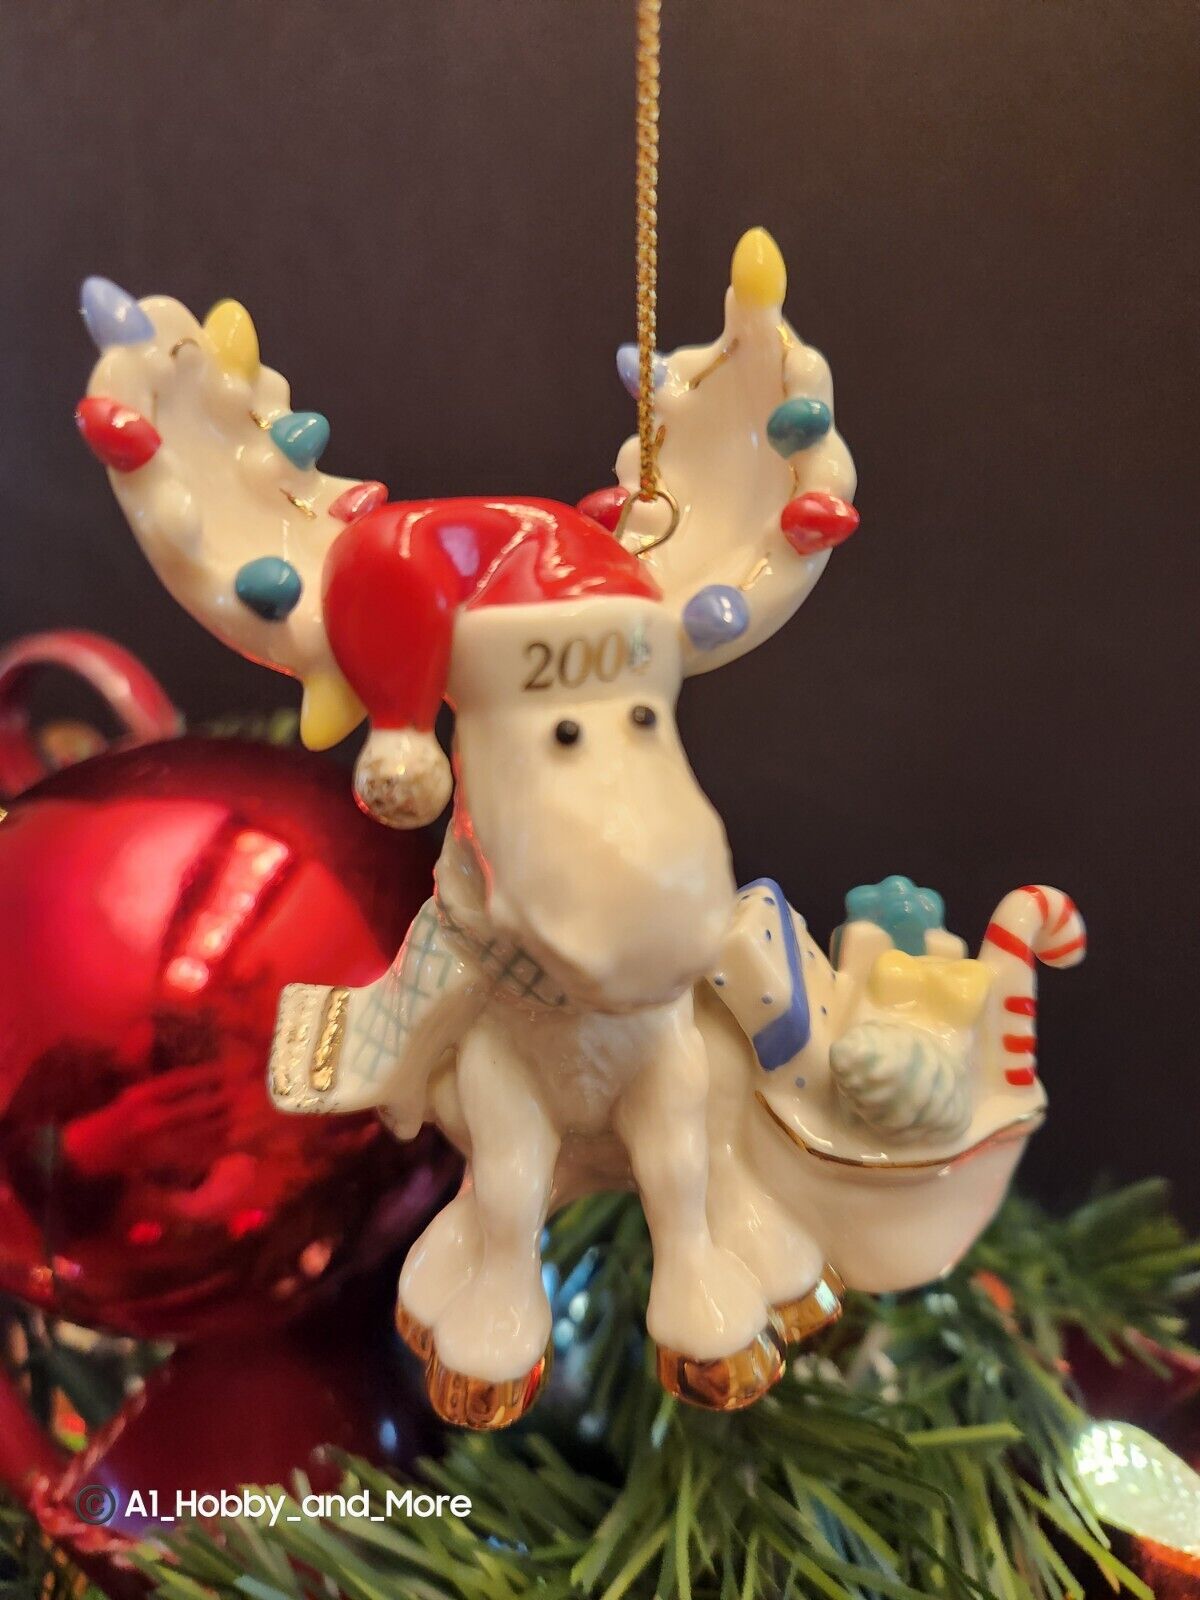 Lenox 2006 MERRY MOOSECLAUS Annual Moose Ornament - New But No Box